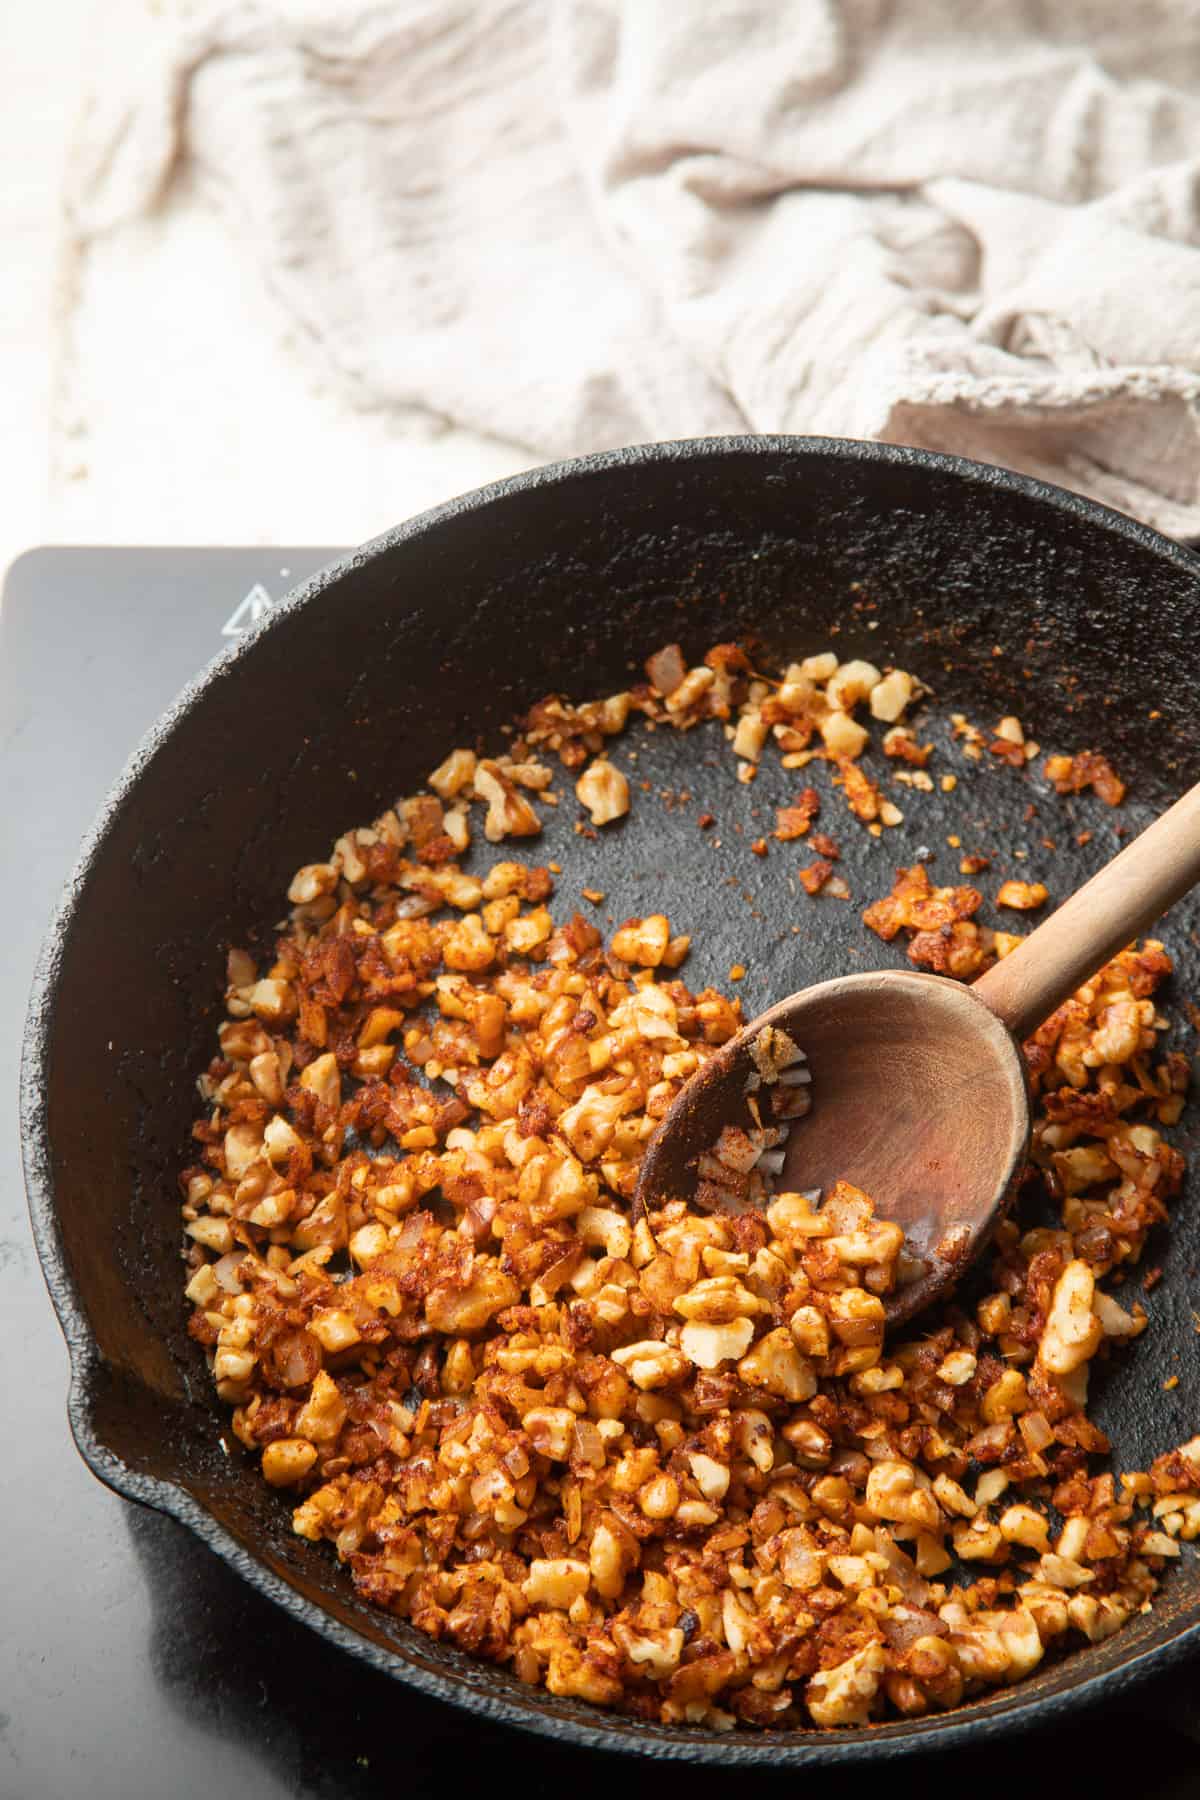 Walnuts cooking in a skillet with onions and spices.